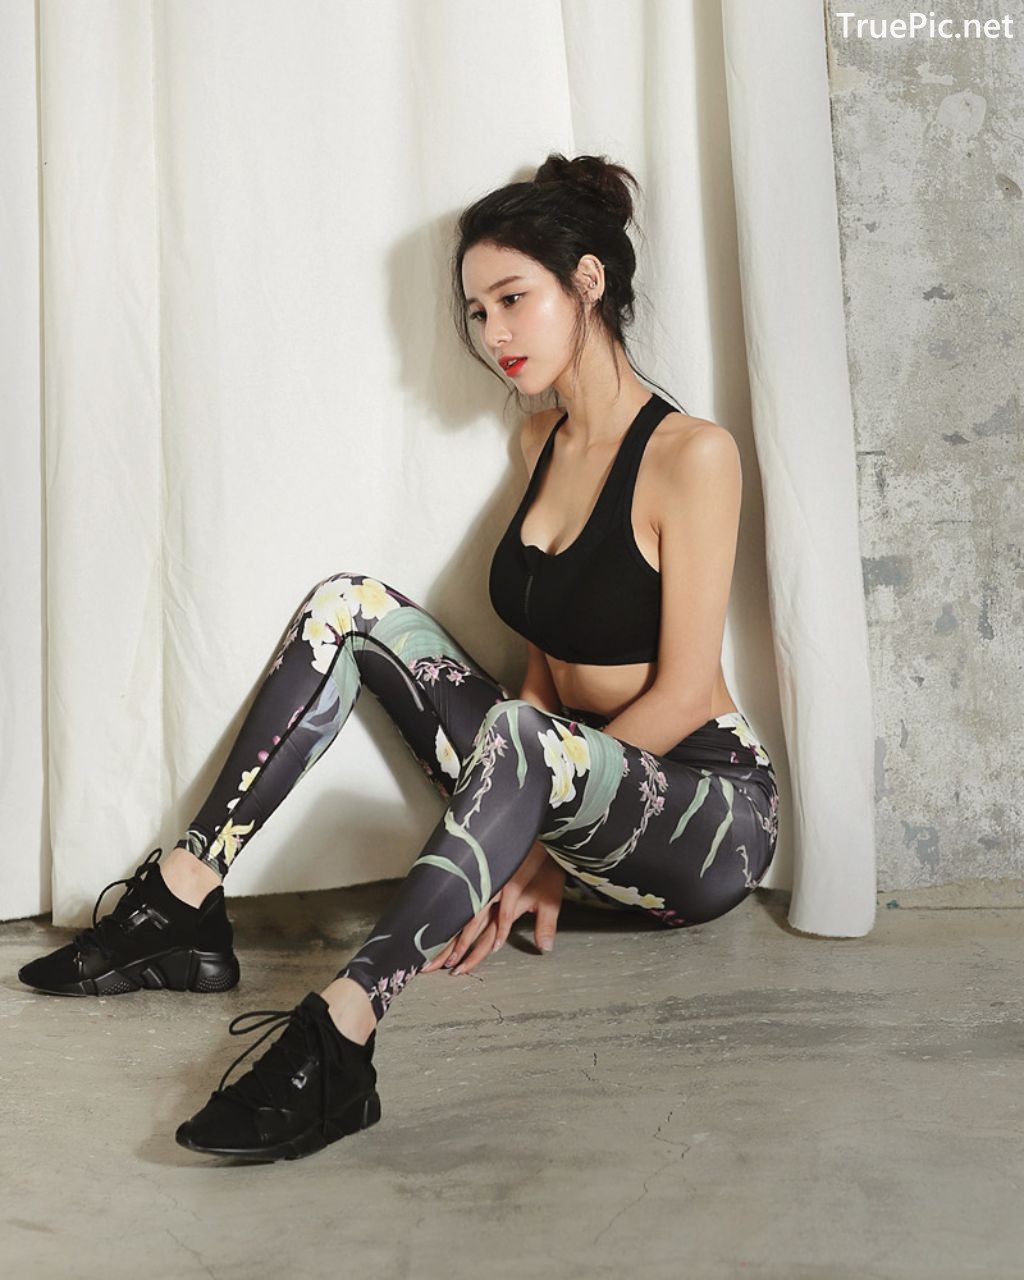 Image-Korean-Fashion-Model-Ju-Woo-Fitness-Set-Collection-TruePic.net- Picture-109